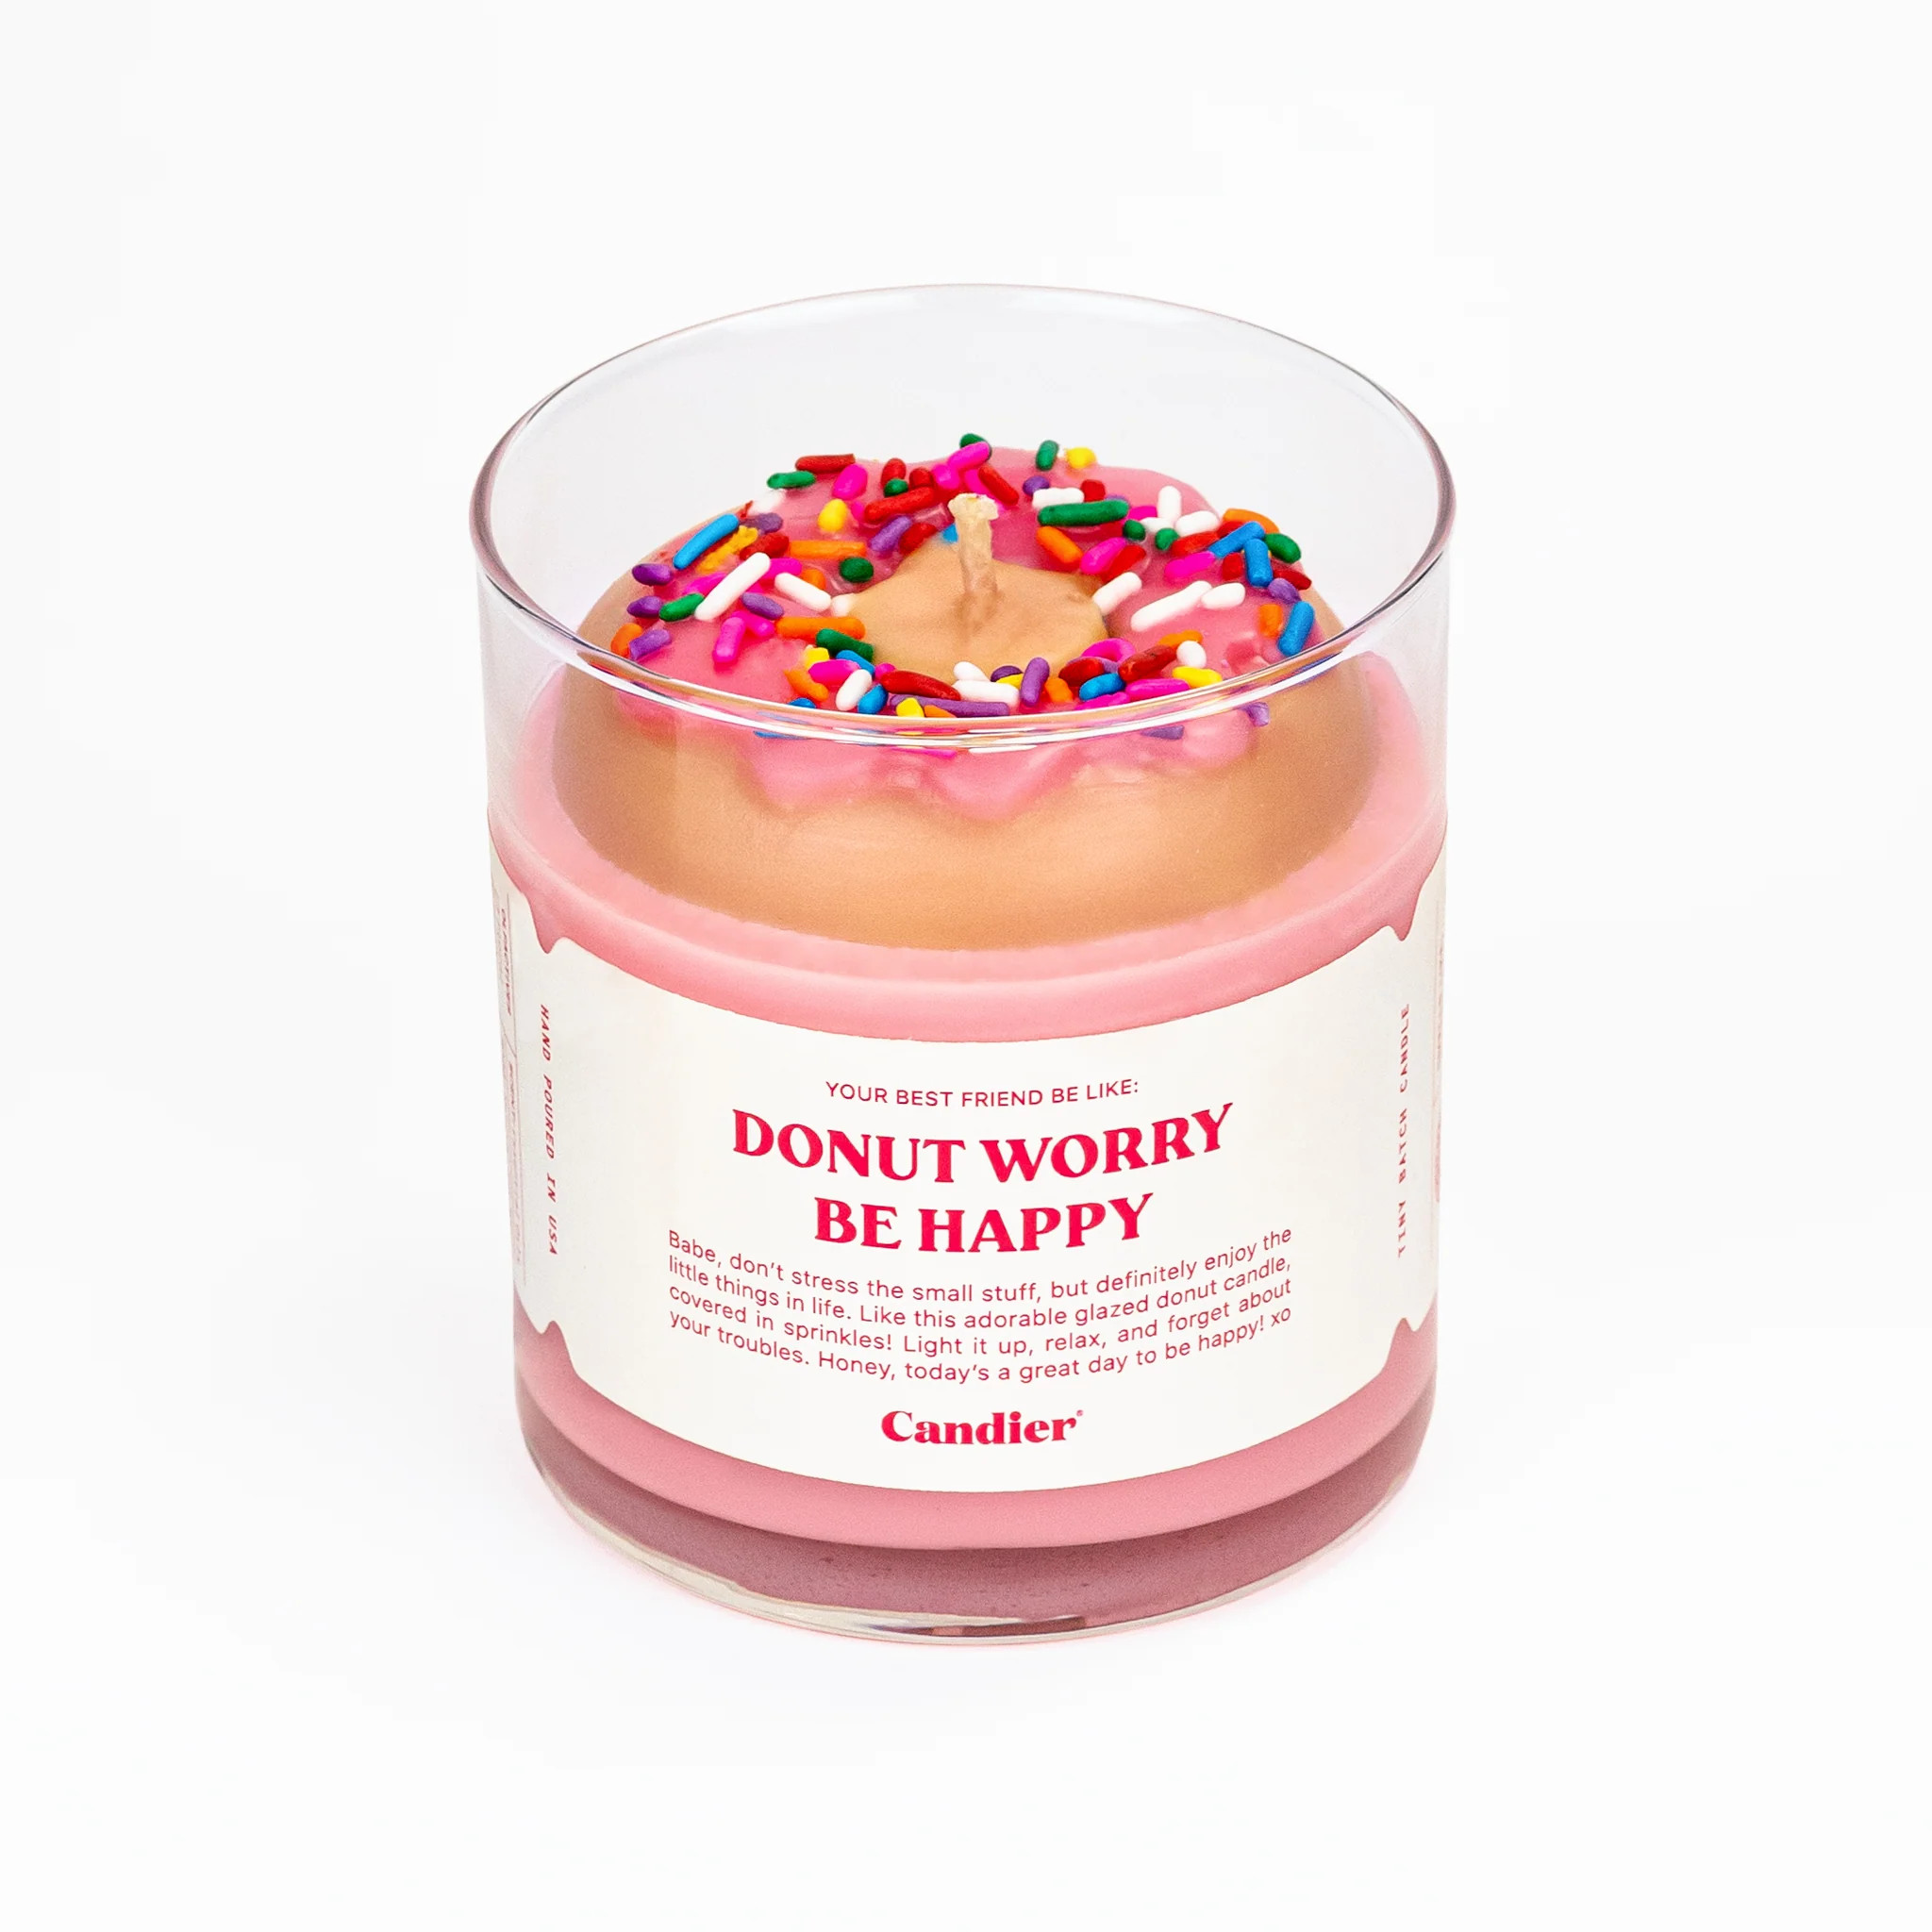 DONUT WORRY BE HAPPY CANDLE | Candier by Ryan Porter